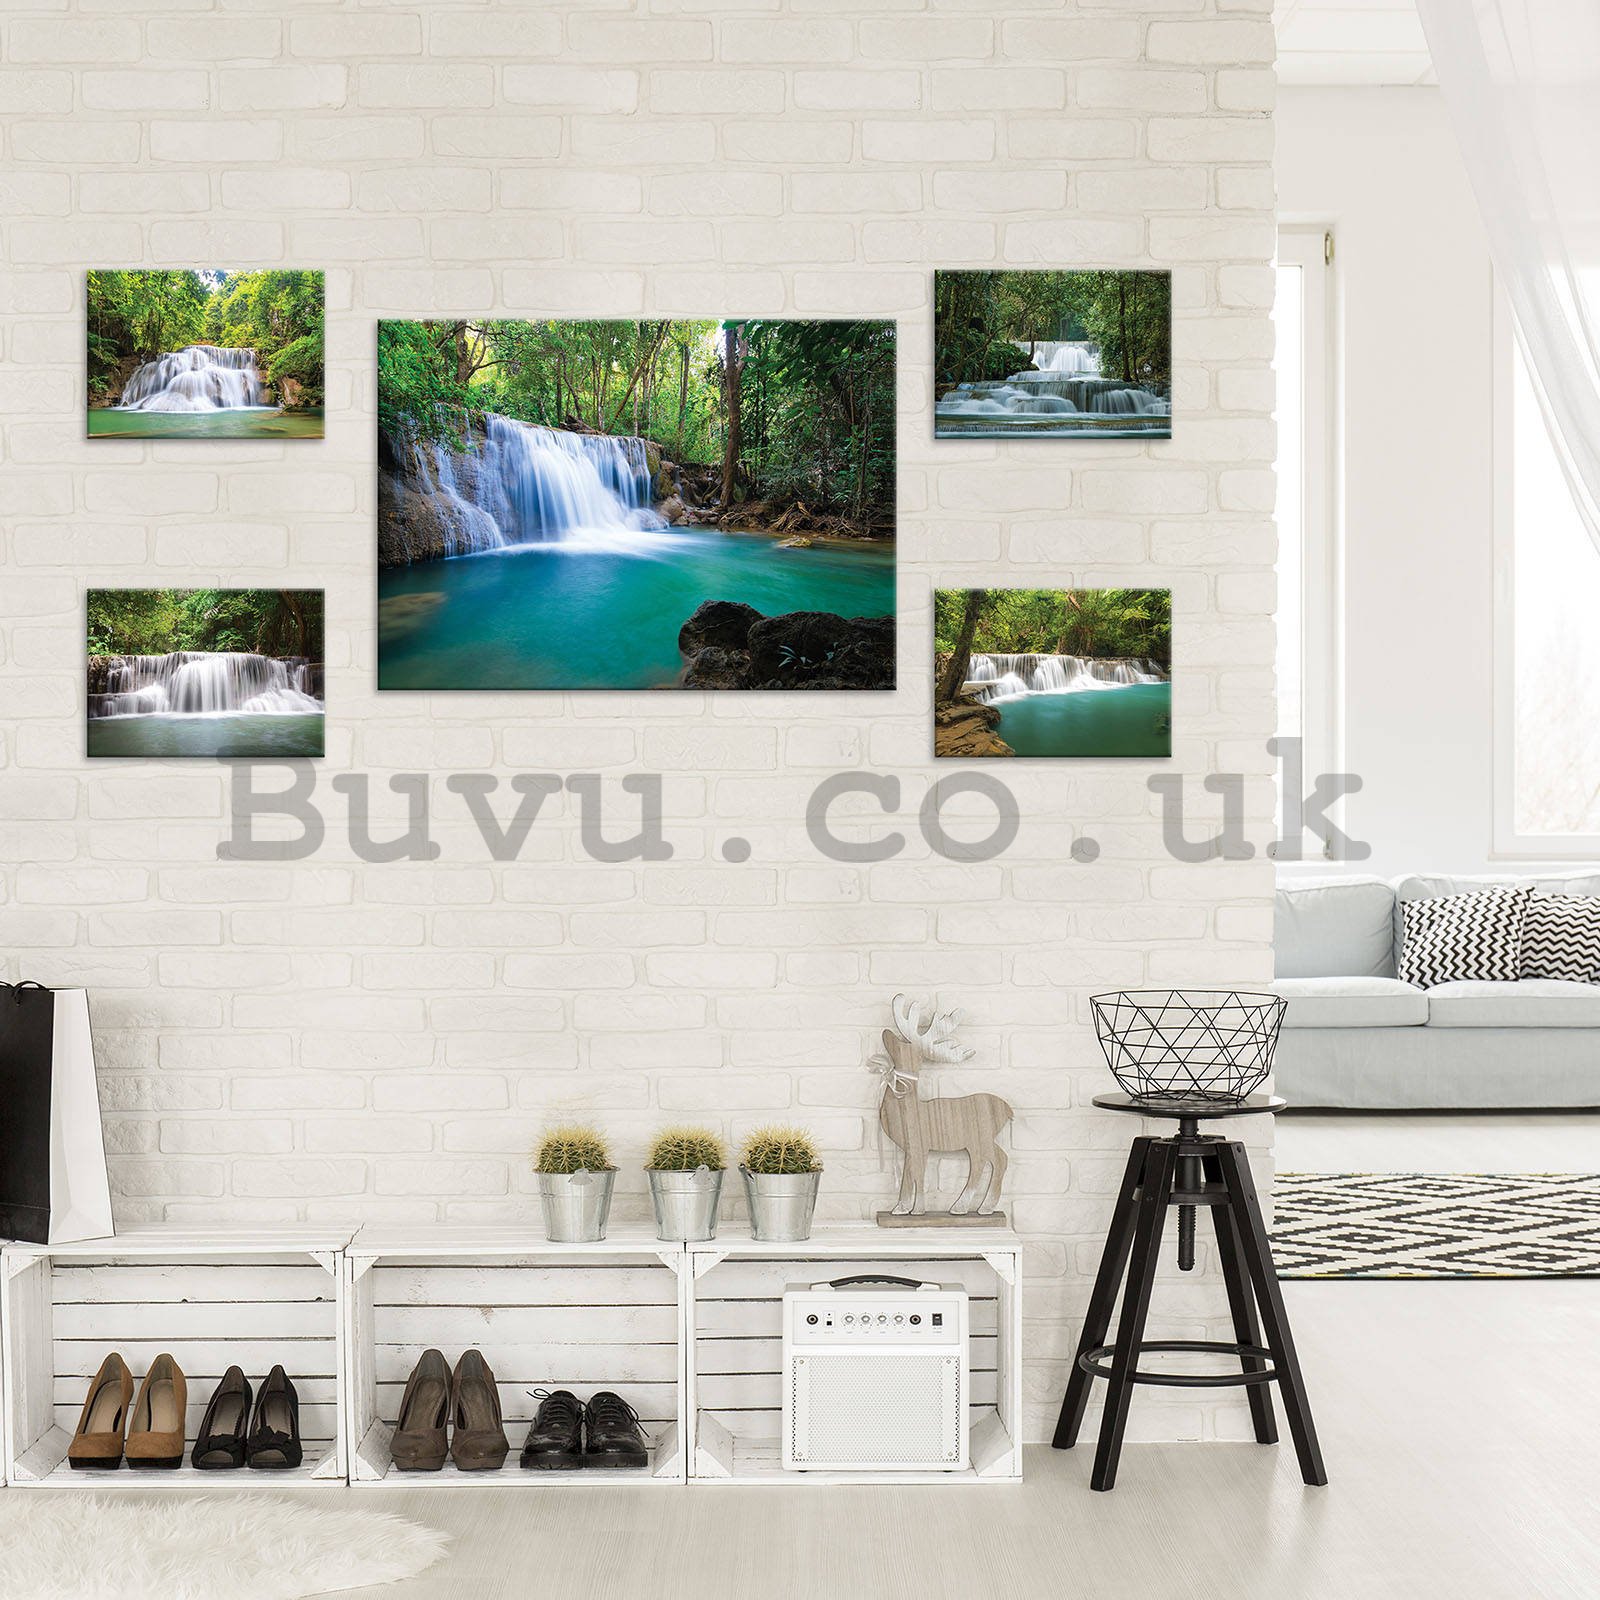 Painting on canvas: Waterfalls (2) - set 1pc 70x50 cm and 4pc 32,4x22,8 cm